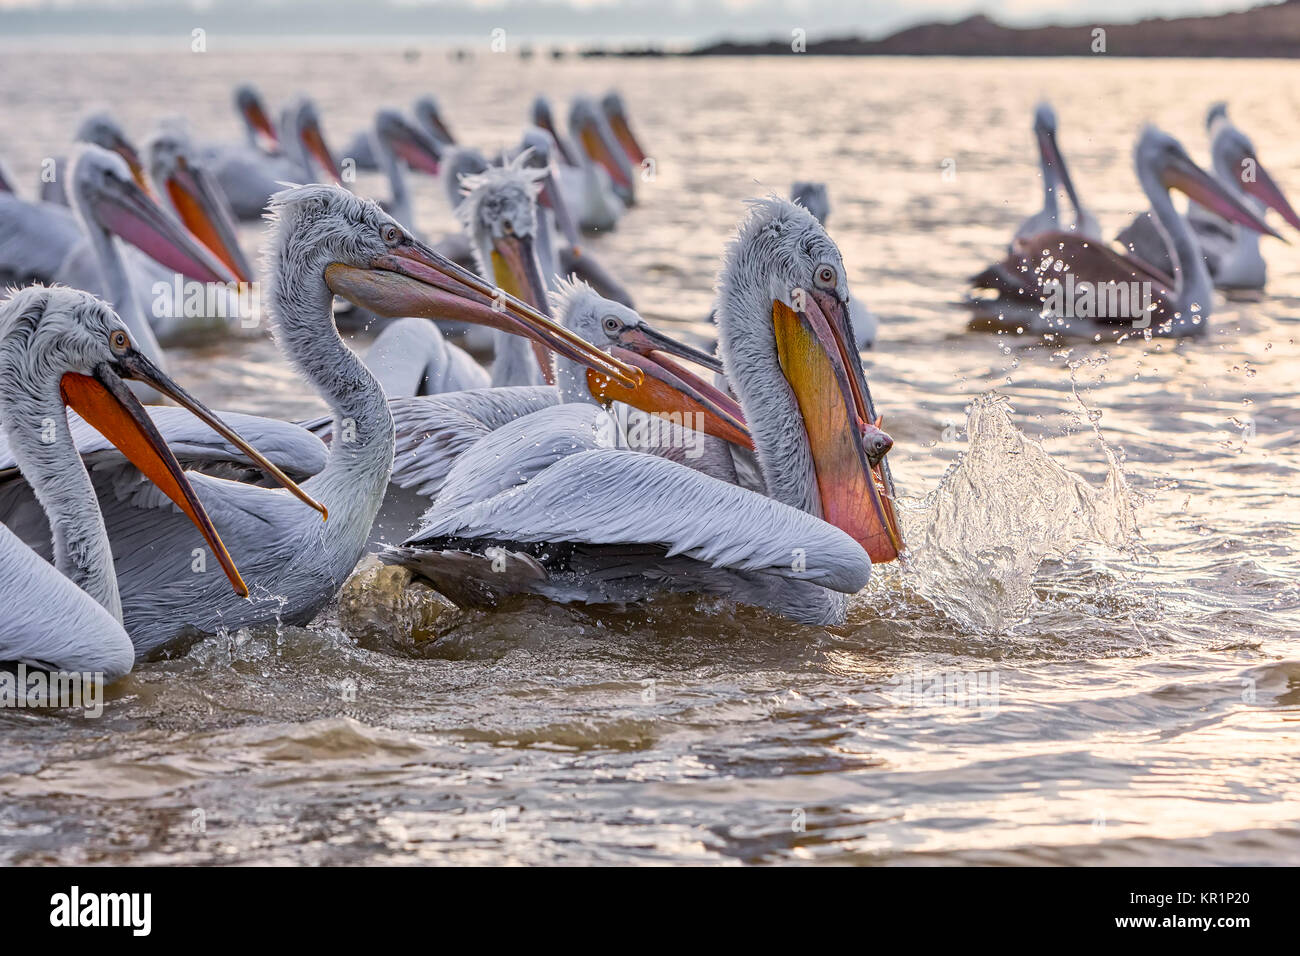 pelican 'Dalmatian' opens his mouth and catches the fish that a fisherman threw at the lake Kerkini, Greece. The fishermen of the area feed the pelica Stock Photo